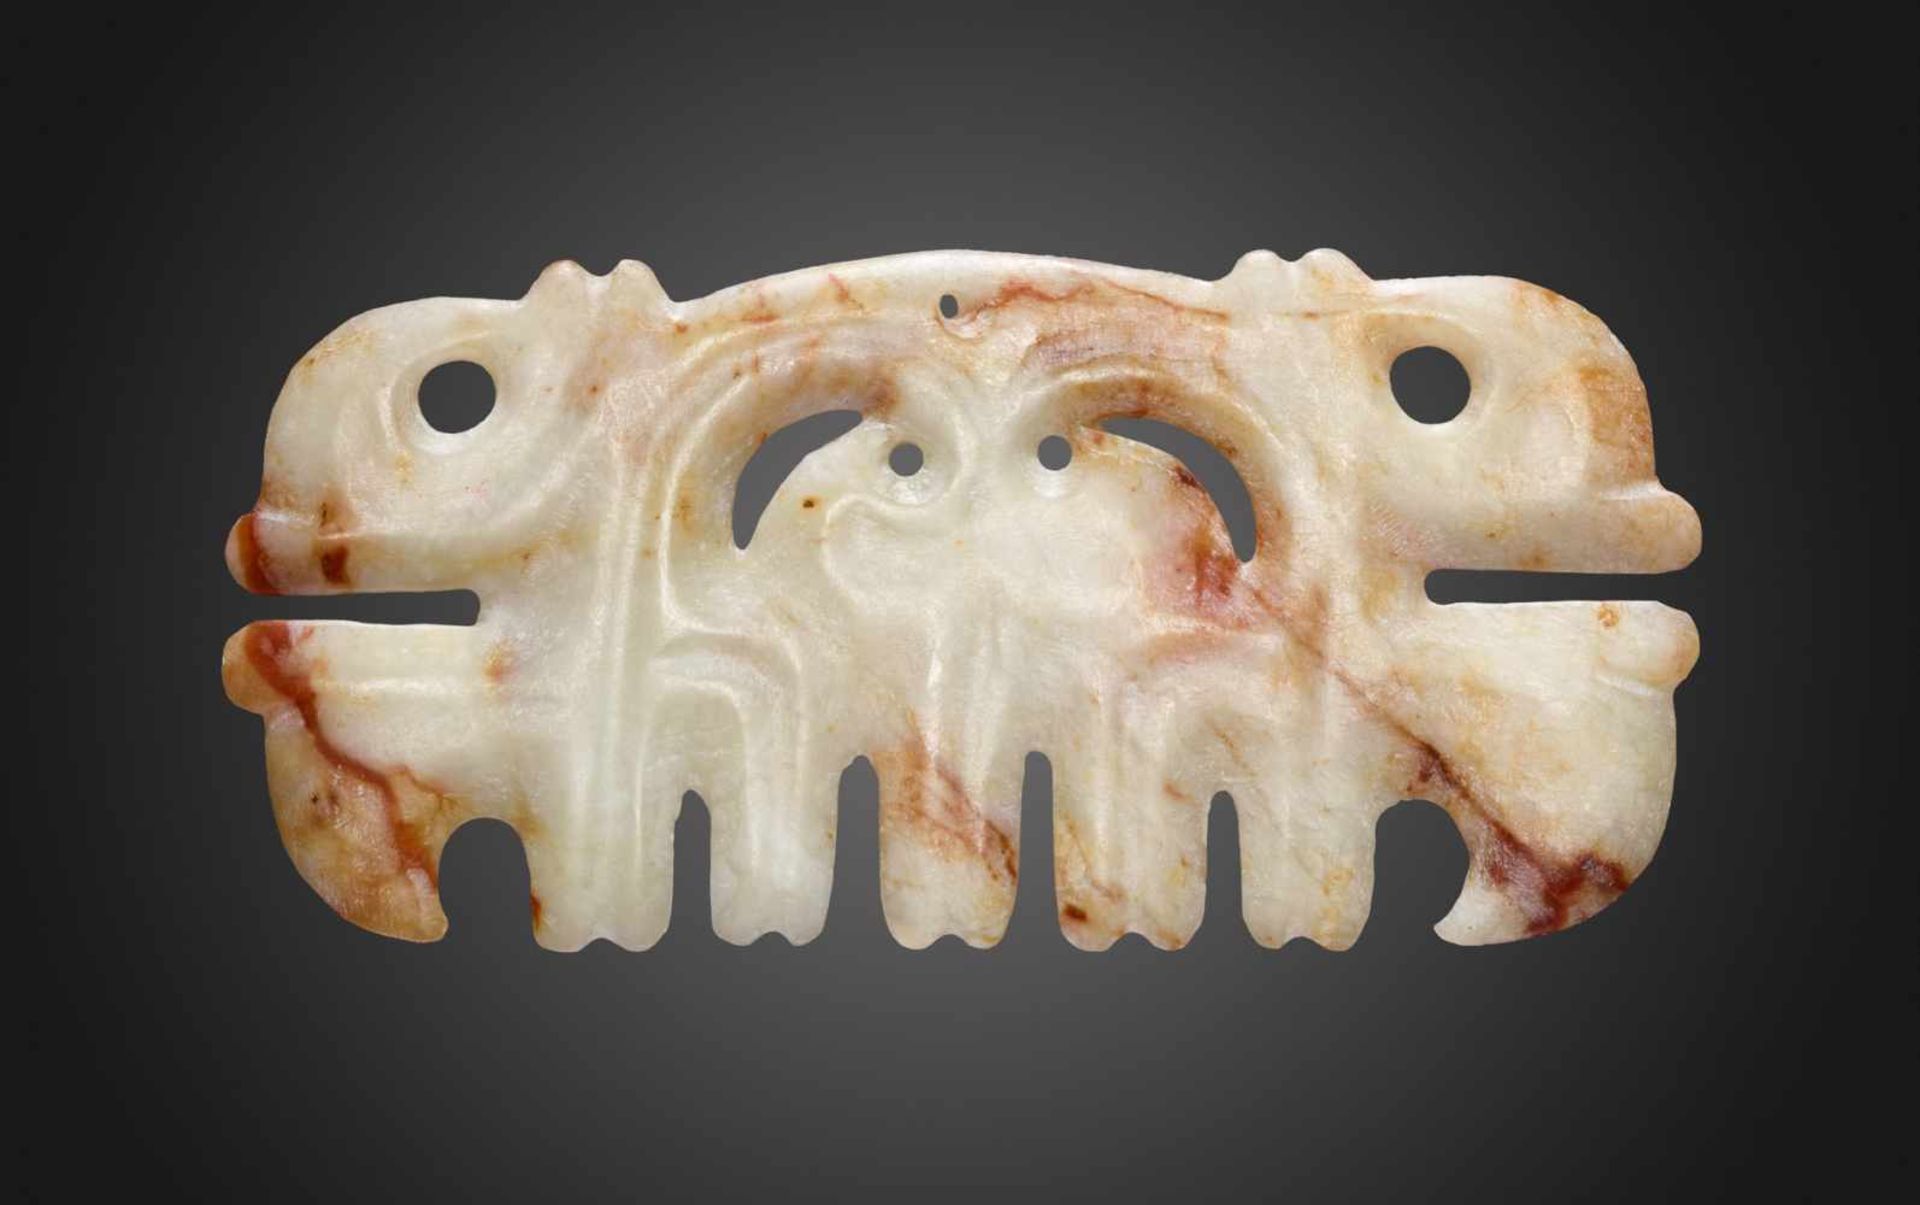 AN IMPOSING HONGSHAN “TOOTHED” ORNAMENT WITH MASK MOTIF Jade. China, Late Neolithic period, Hongshan